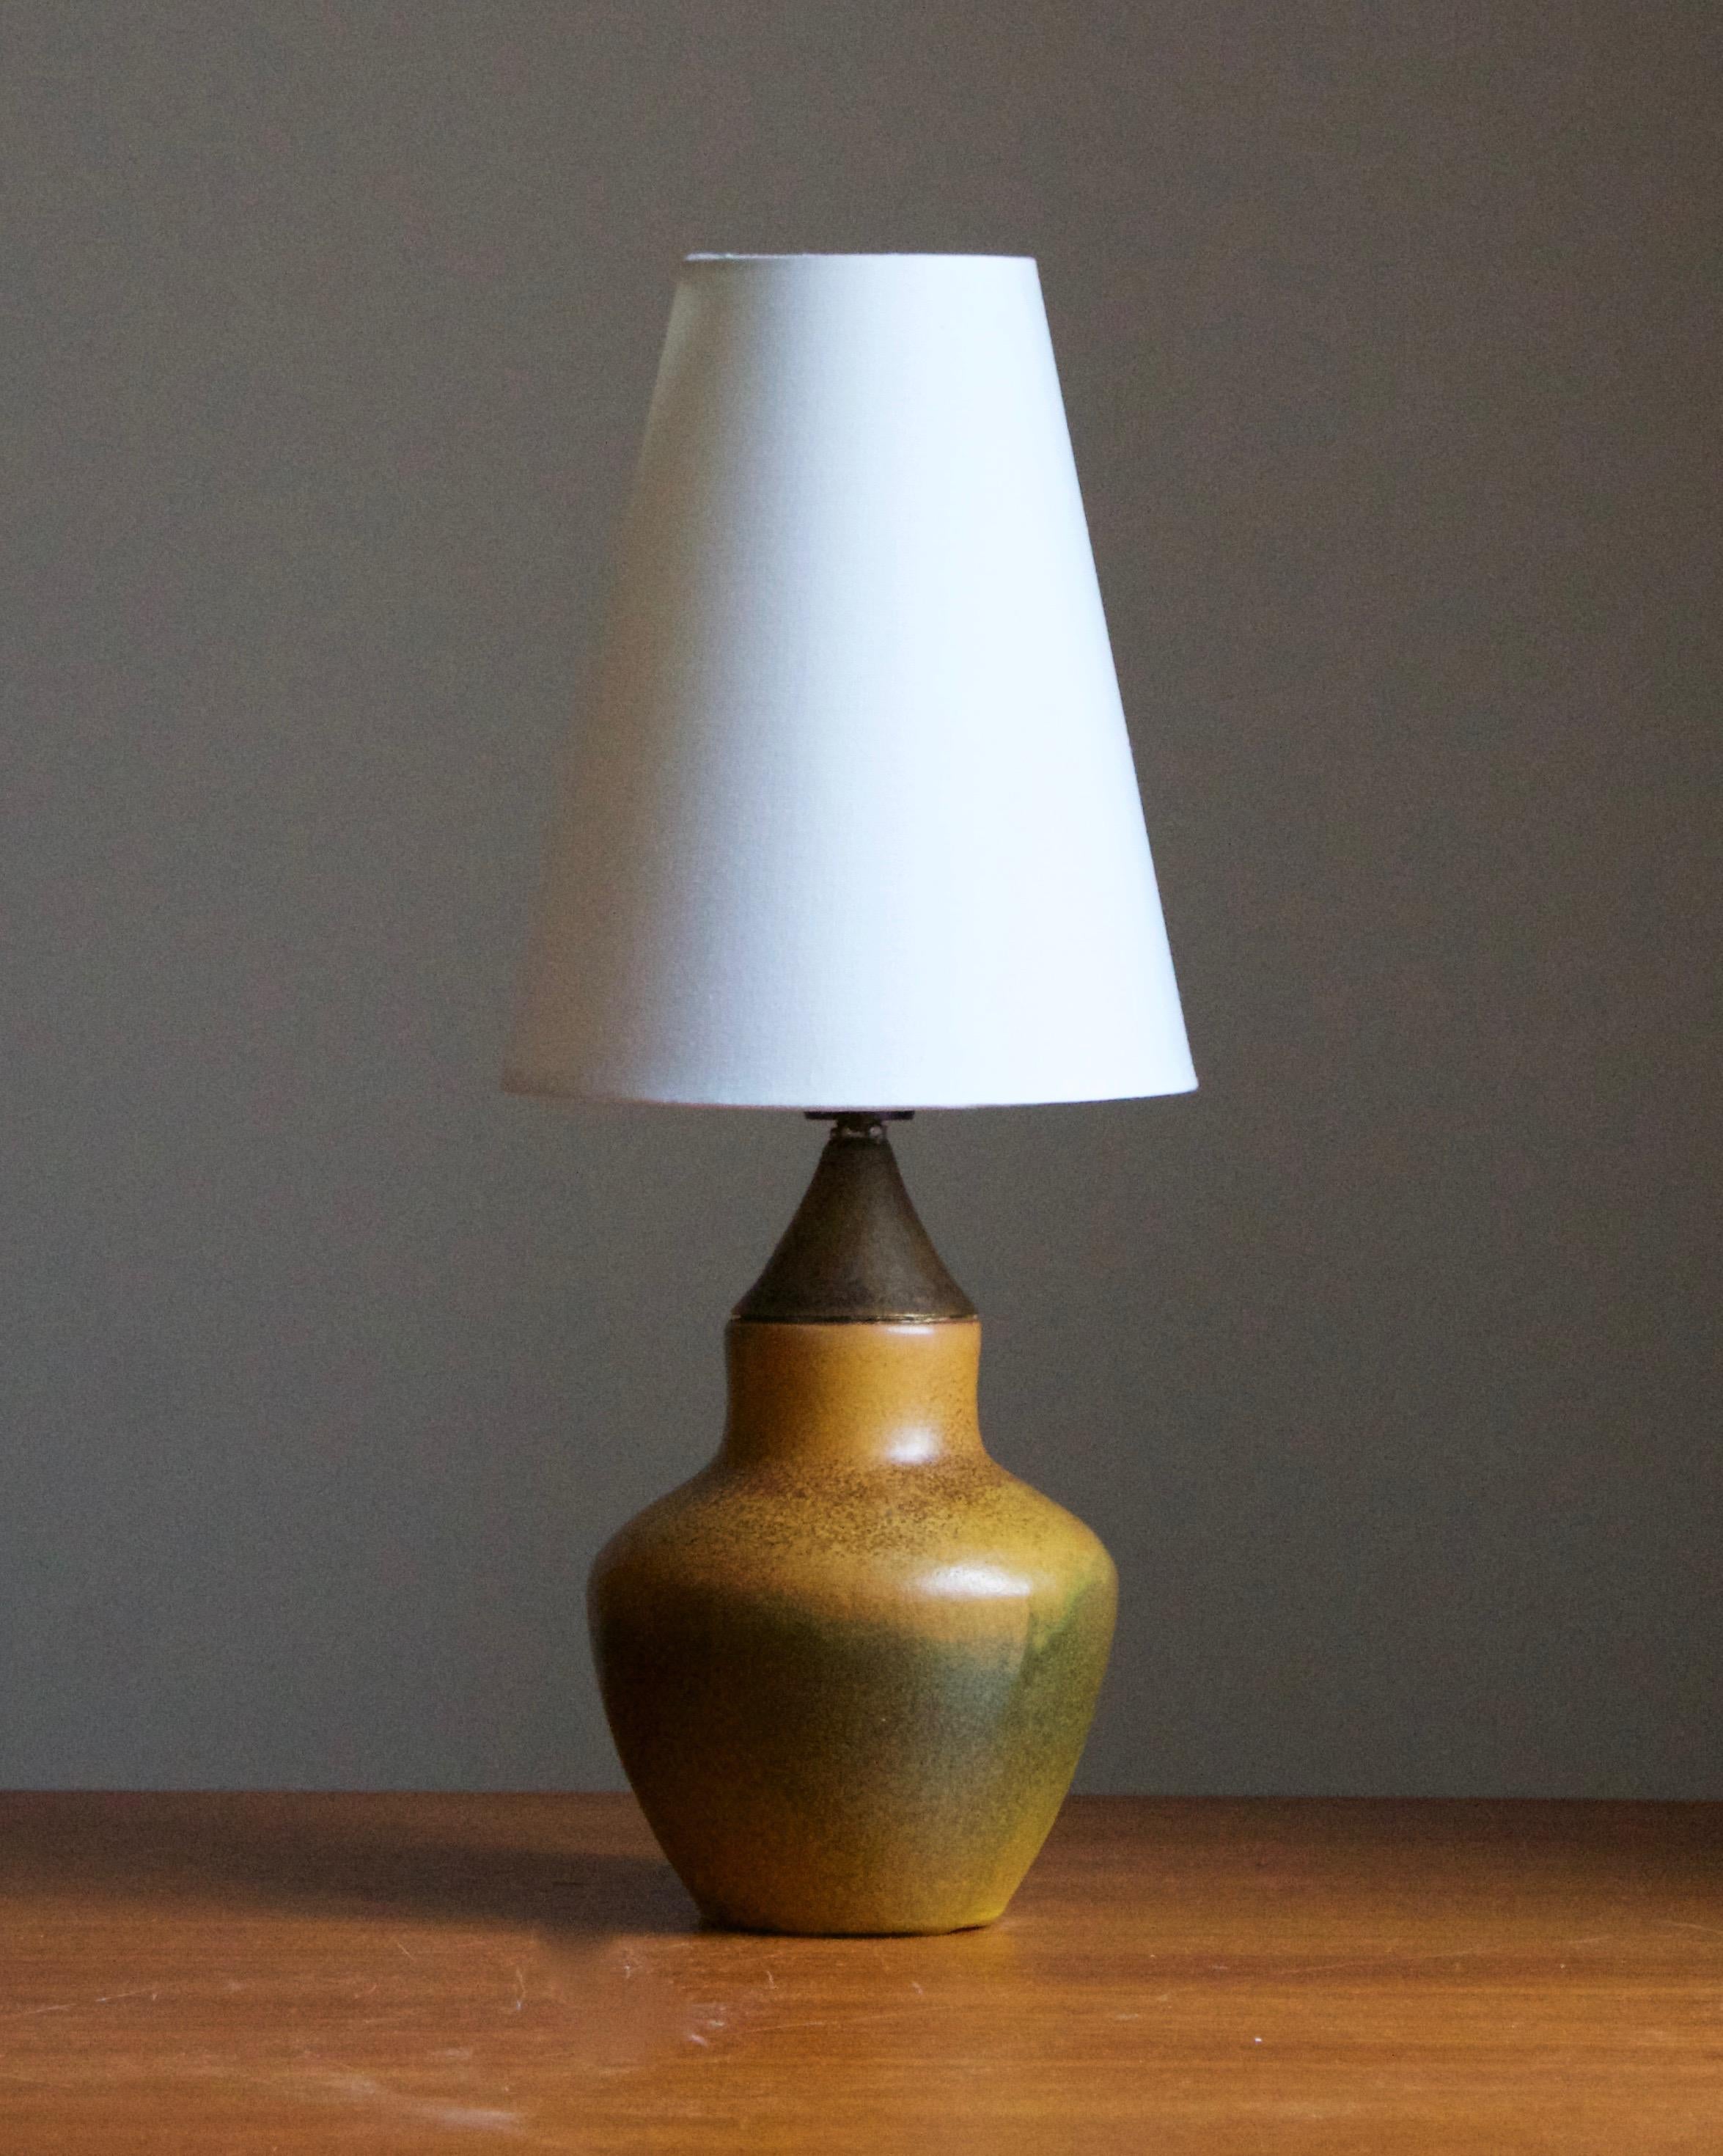 A small table lamp. Designed and produced in Sweden, 1940s. Brand new lampshade.

Glaze features orange-green-brown colors.